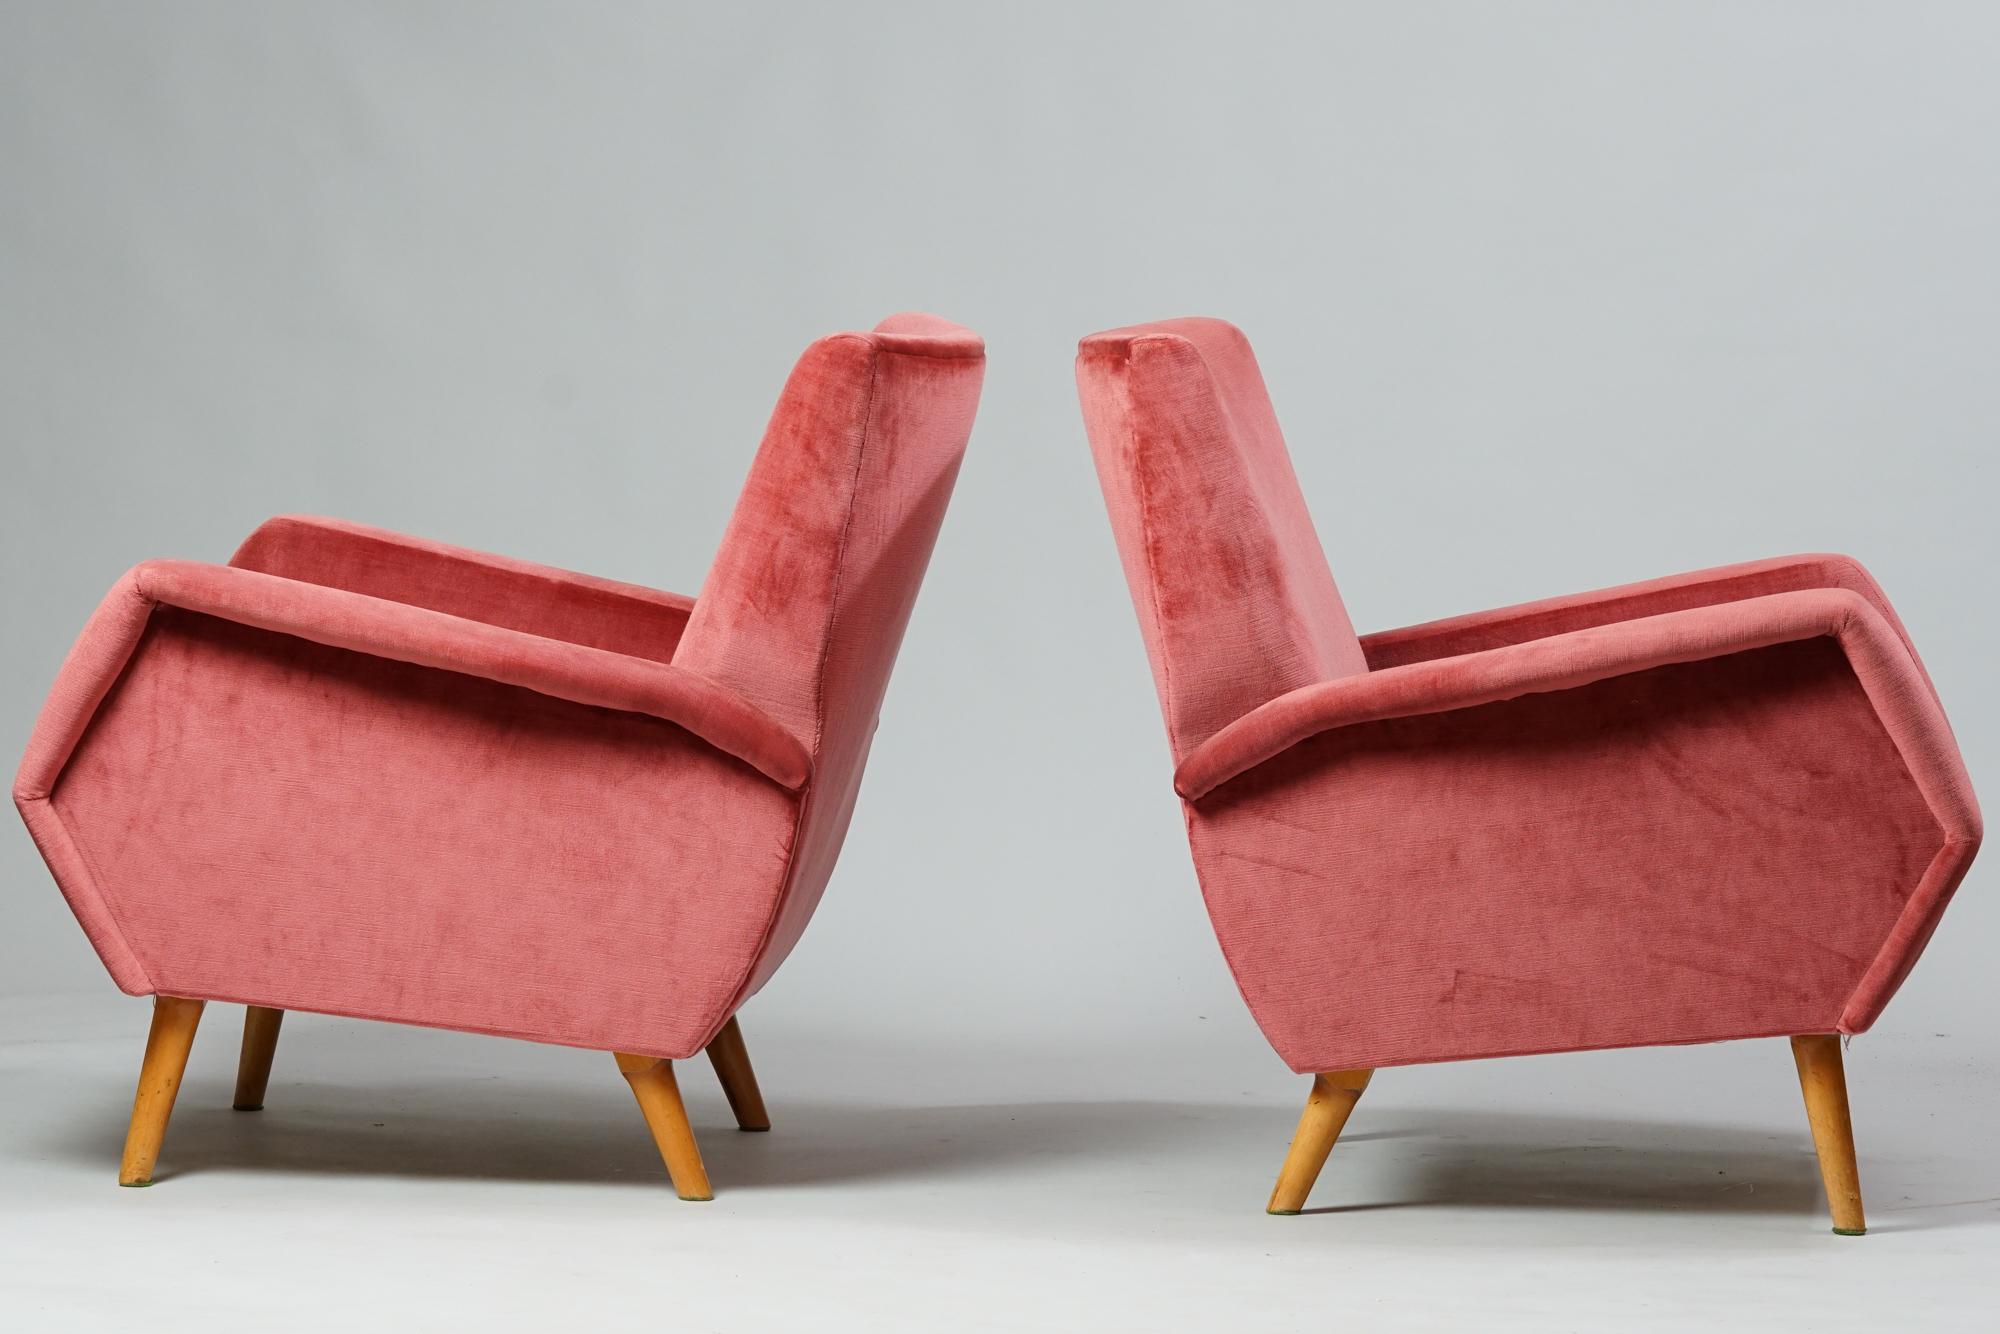 A Pair of model 803 armchairs by Gio Ponti for Cassina, 1950s. Oak and fabric upholstery. Good vintage condition, minor patina consistent with age and use. The armchairs are sold as a set. The model 803 armchairs were originally designed in 1954.